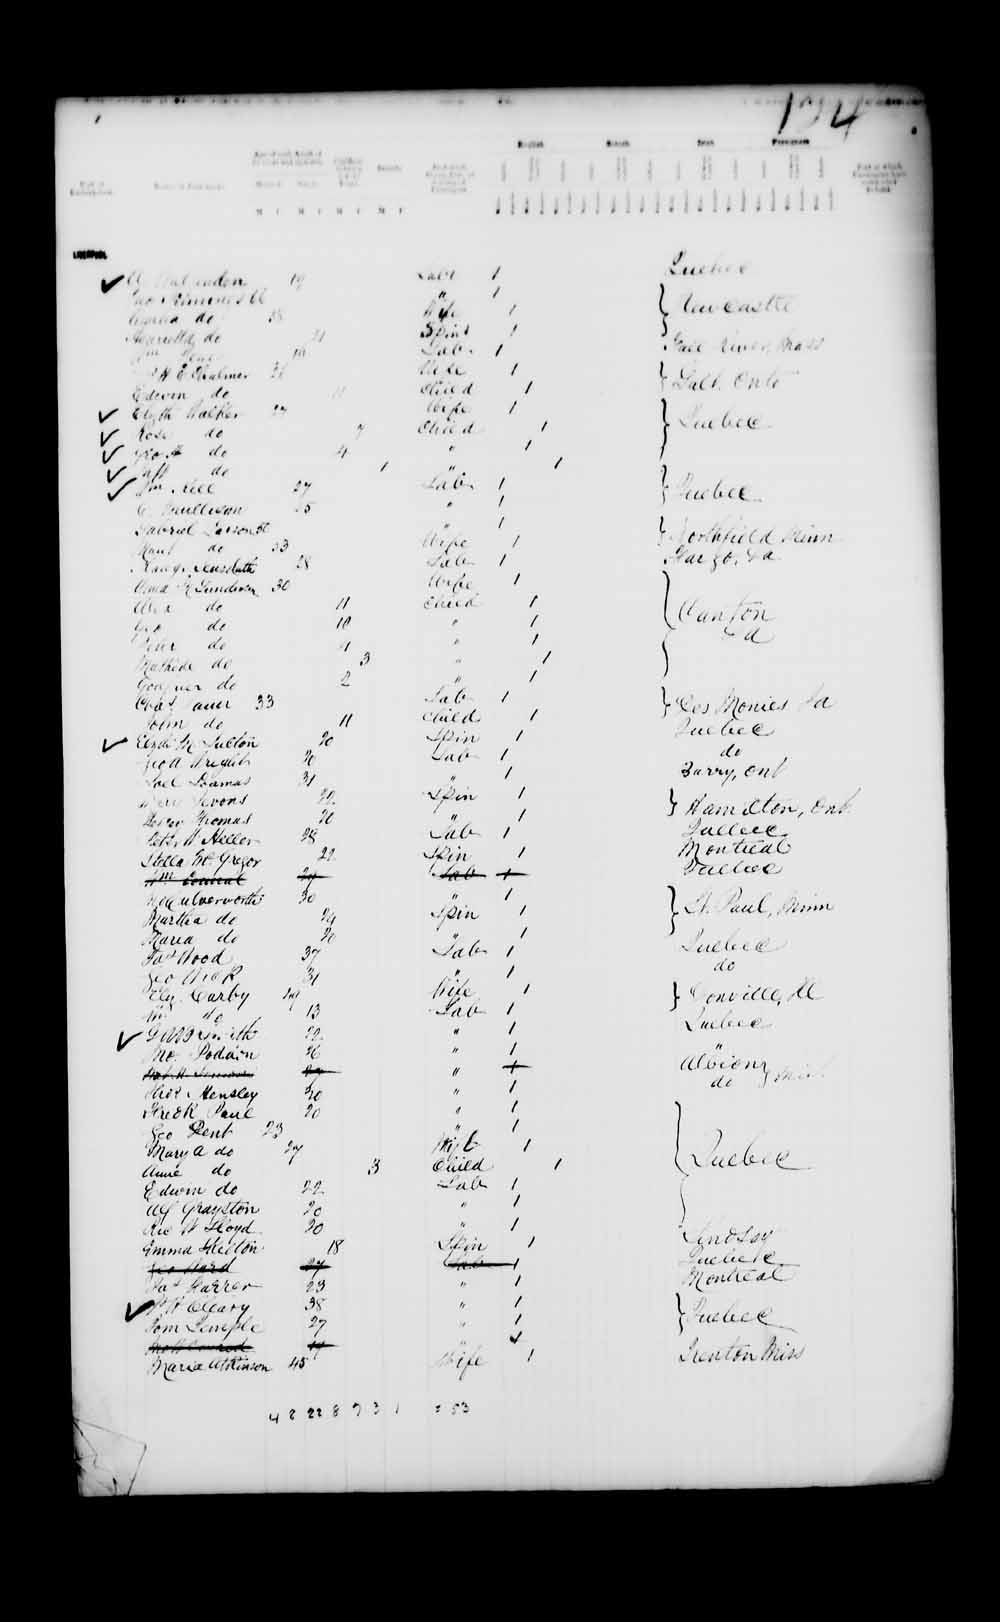 Digitized page of Passenger Lists for Image No.: e003541212